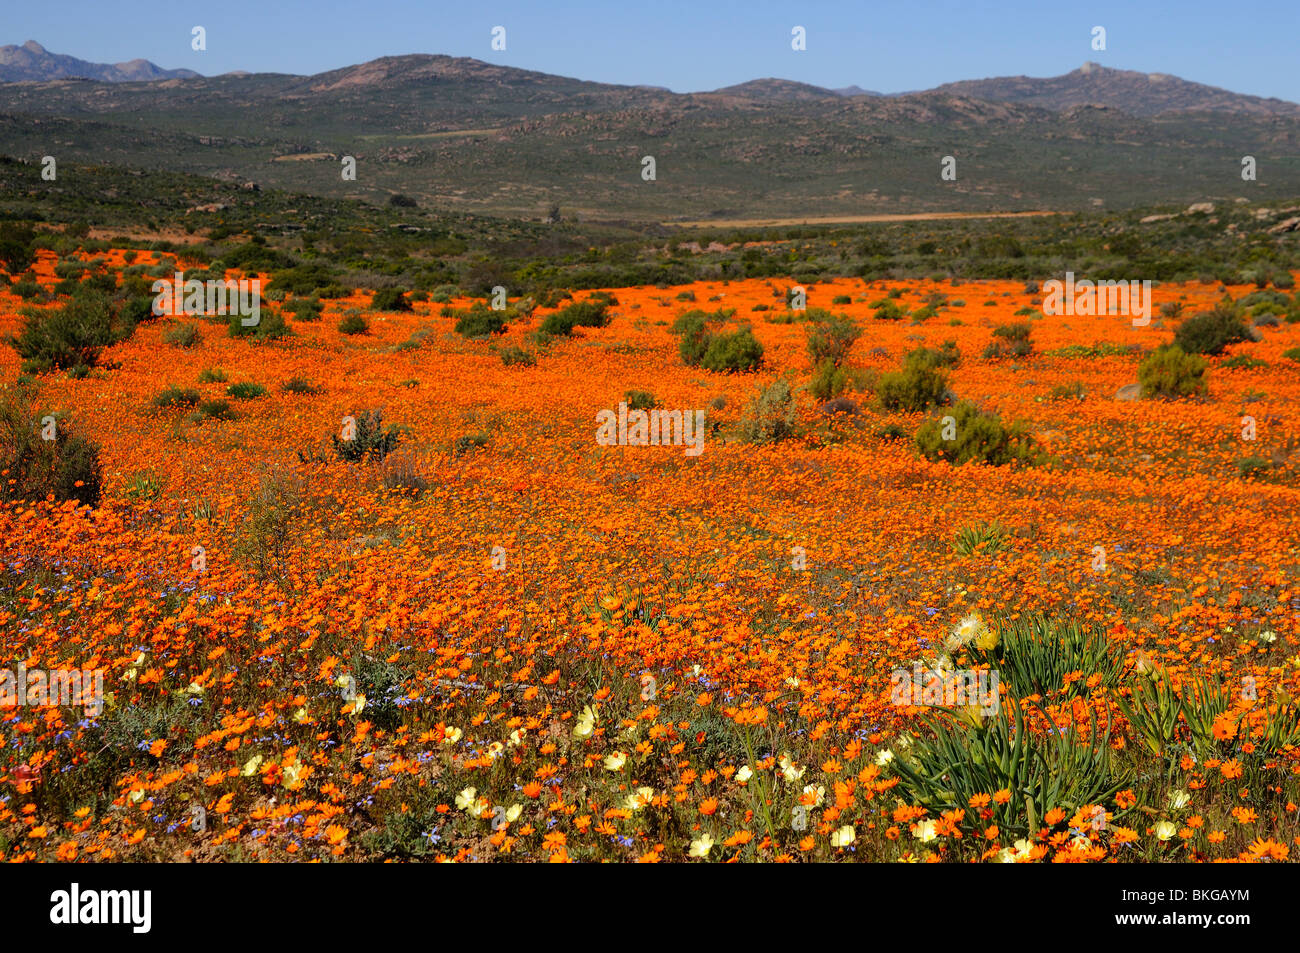 Carpet of spring flowers in Skilpad Nature Reserve near Kamieskroon, Namaqualand, South Africa Stock Photo